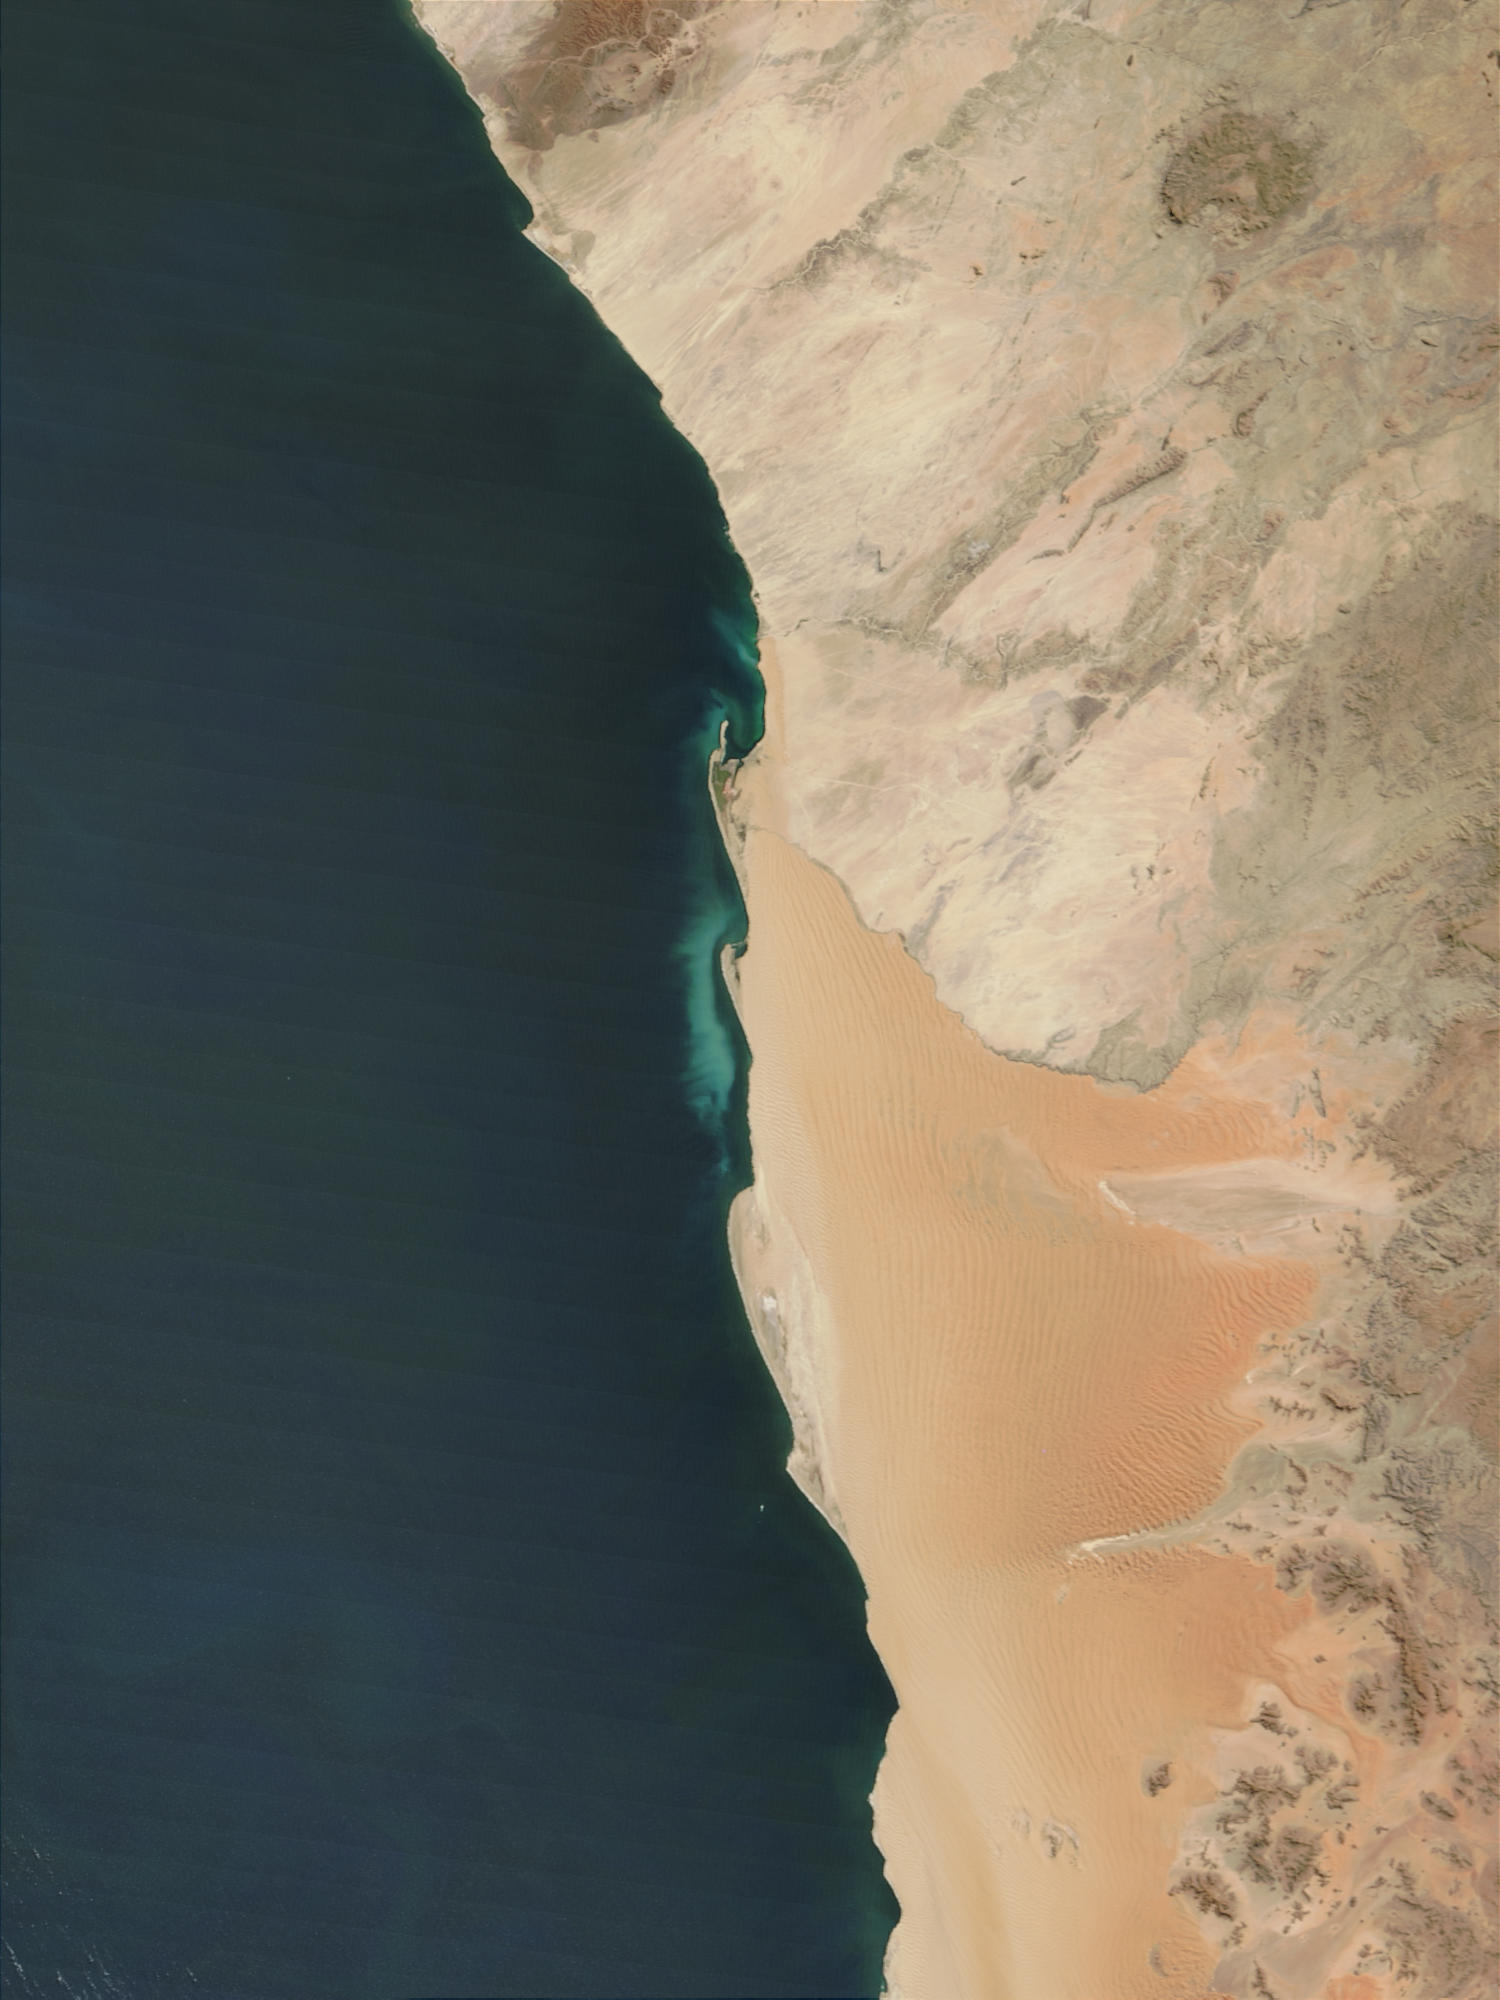 Sulfur plume off Namibia - related image preview